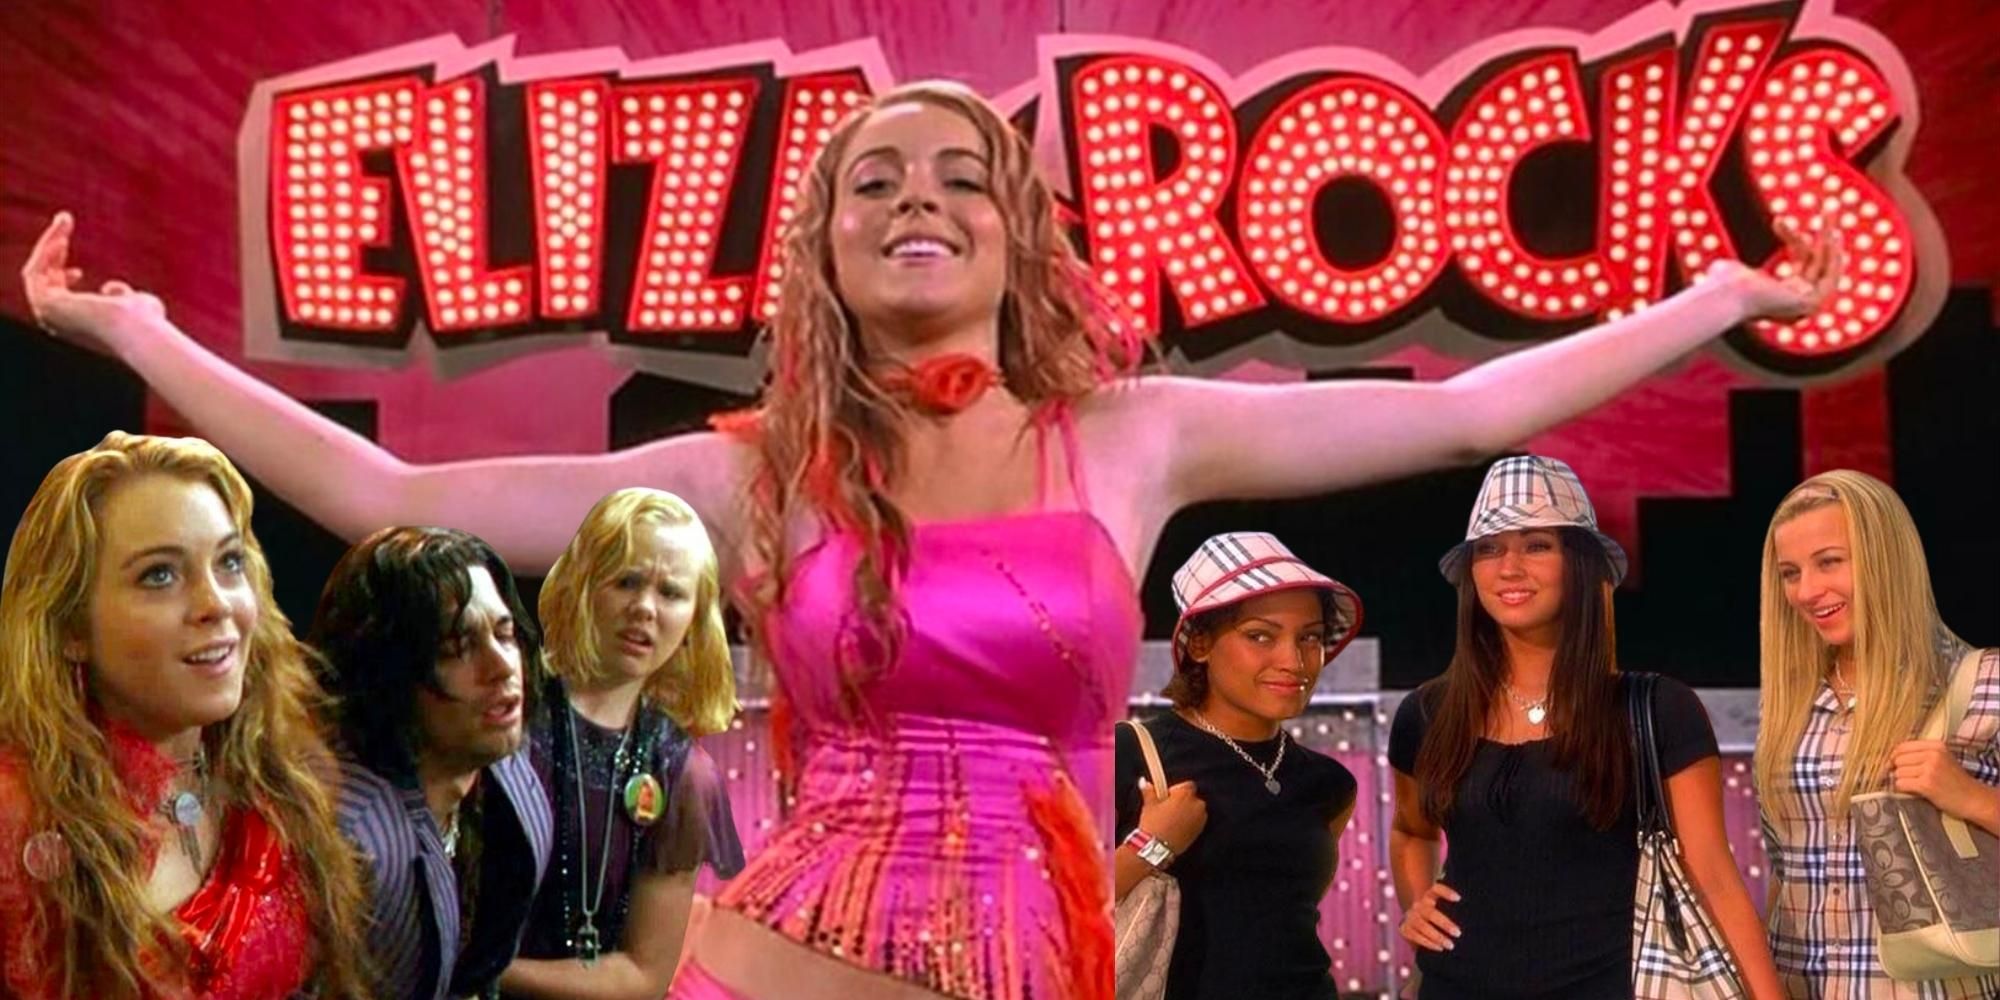 Lindsay Lohan dancing in front of an Eliza Rocks sign in Confessions of a Teenage Drama Queen